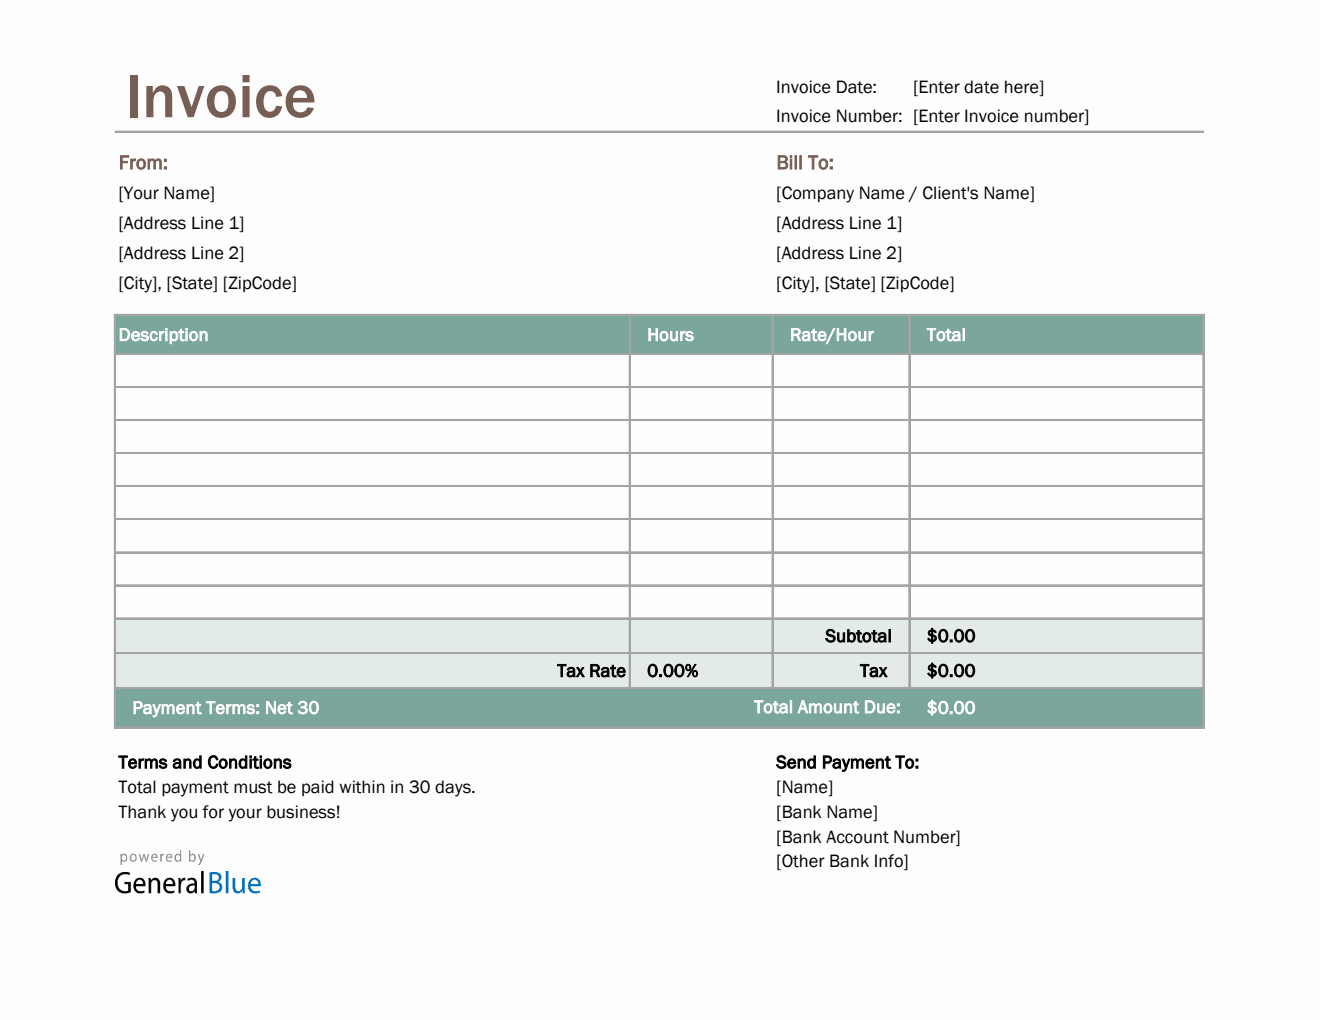 Excel Invoice Template for U.S. Freelancers With Tax calculation (Green)